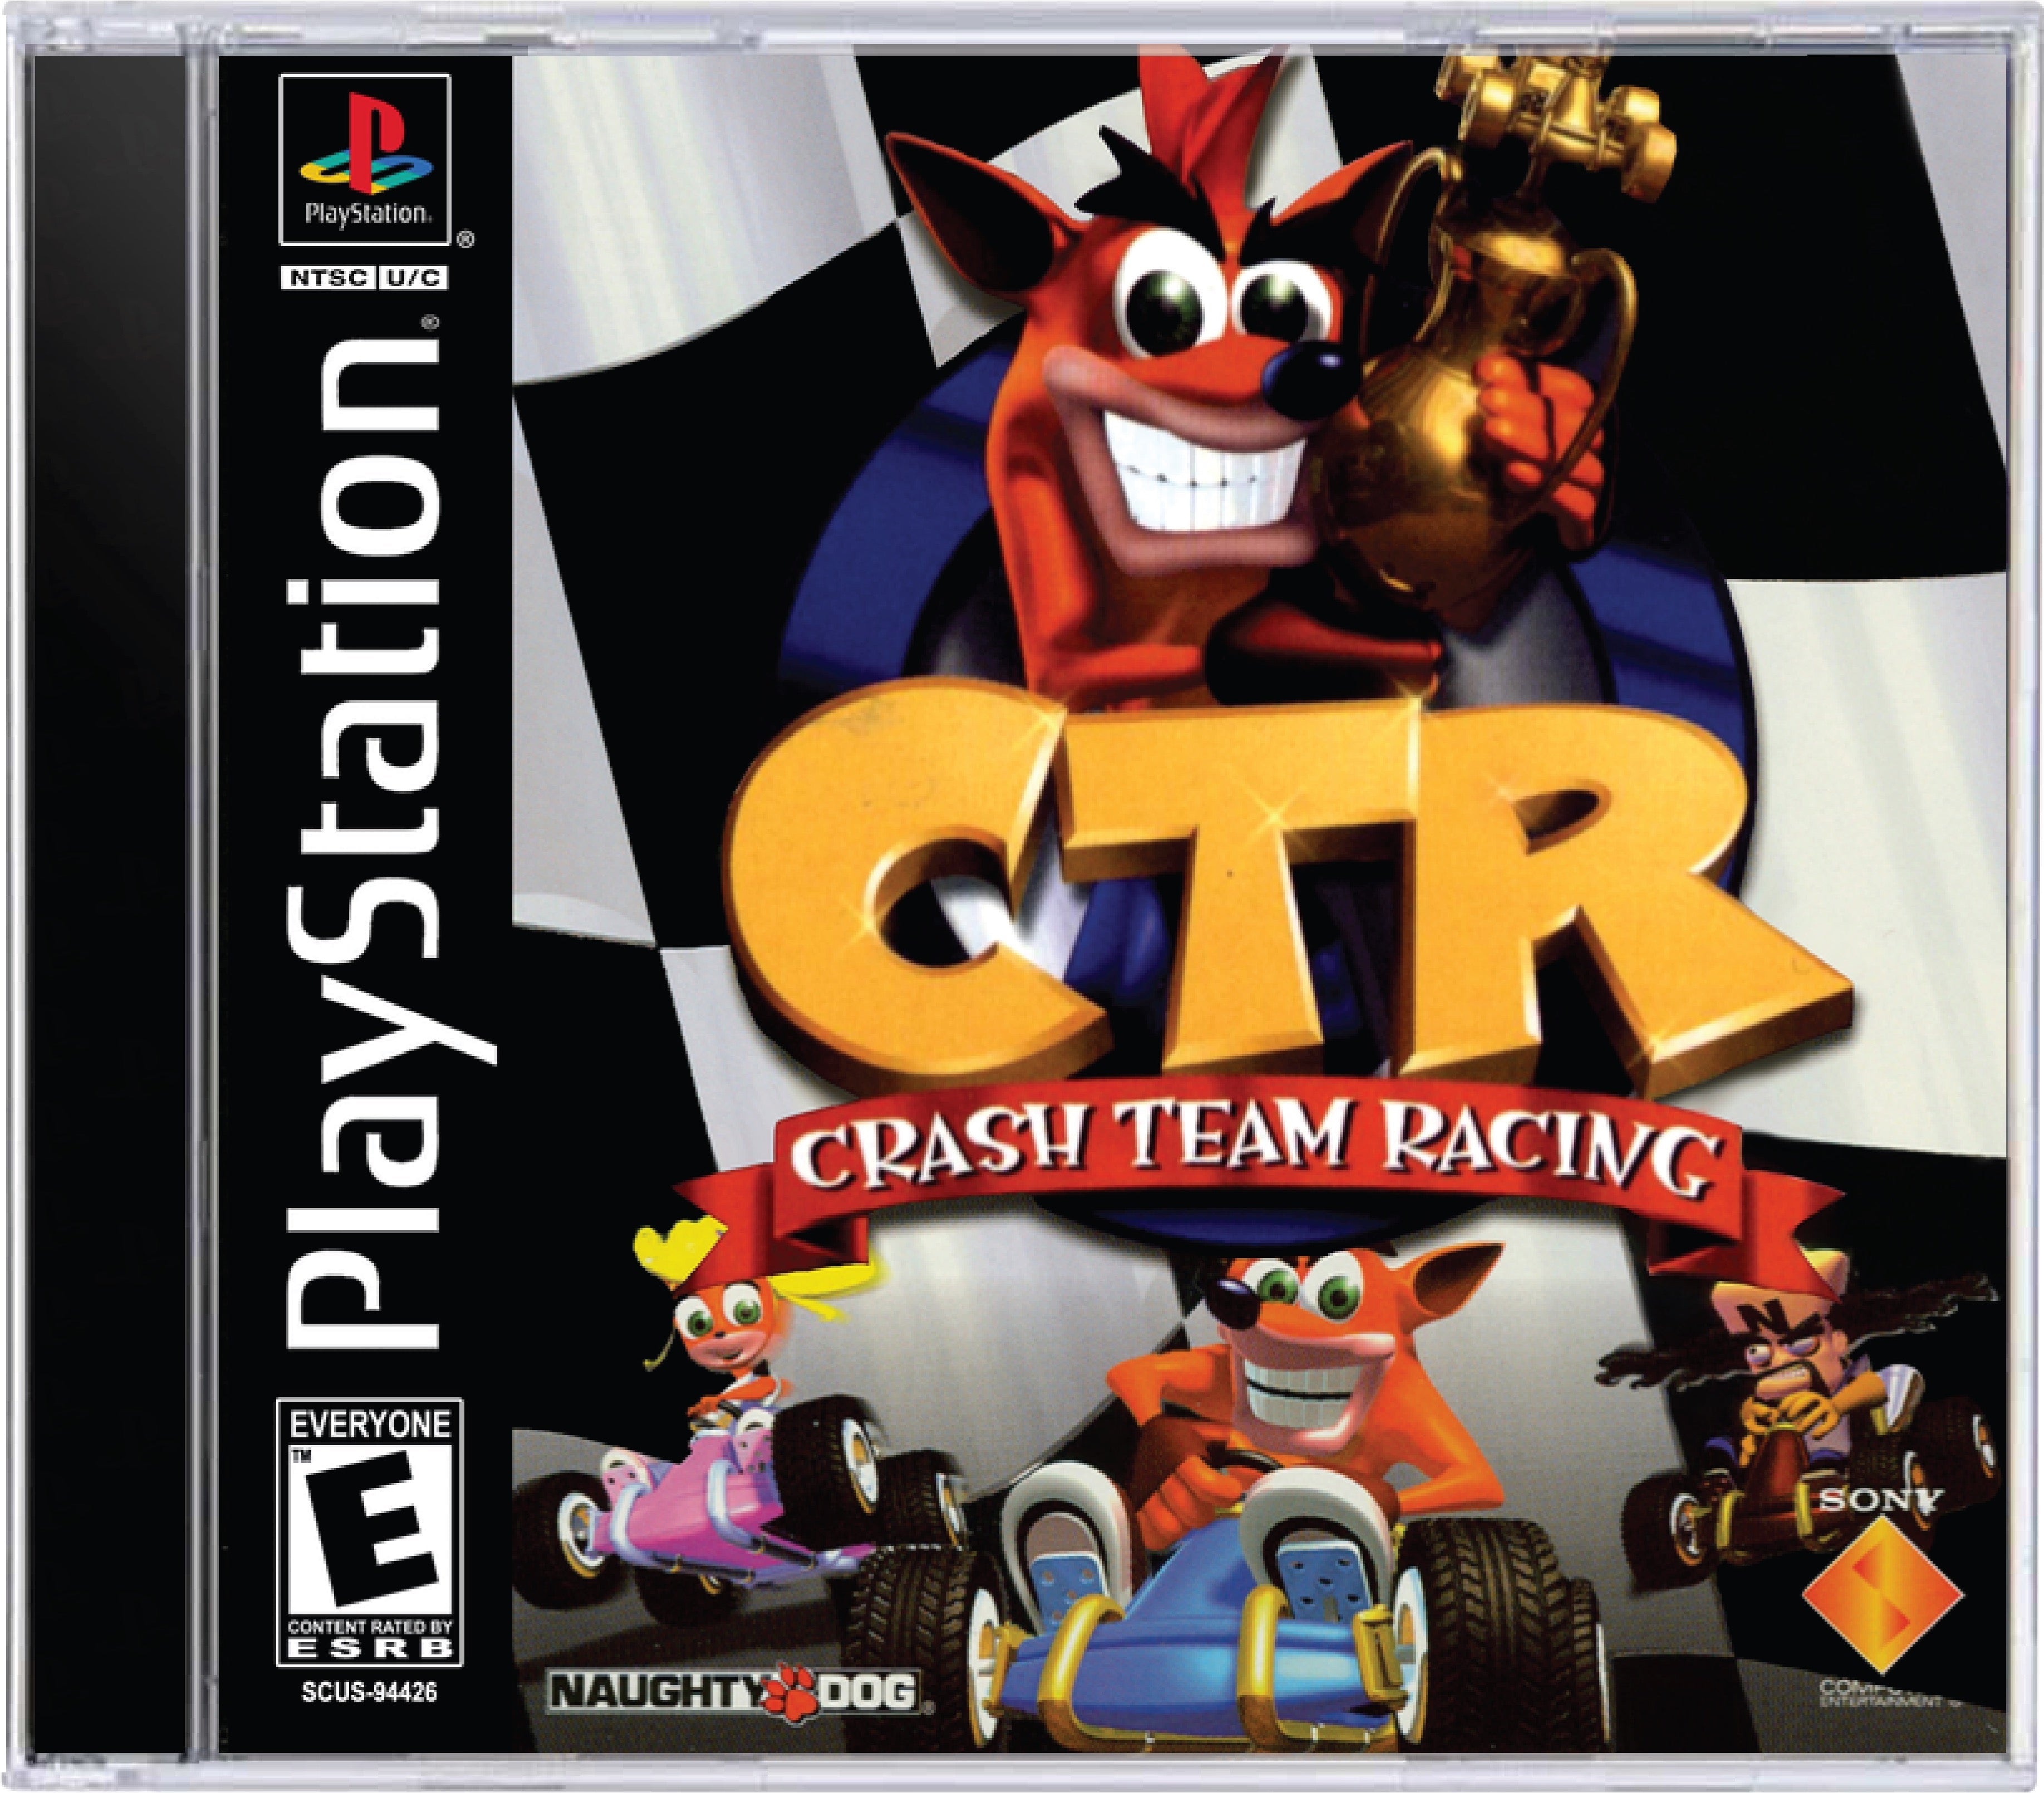 CTR Crash Team Racing Cover Art and Product Photo